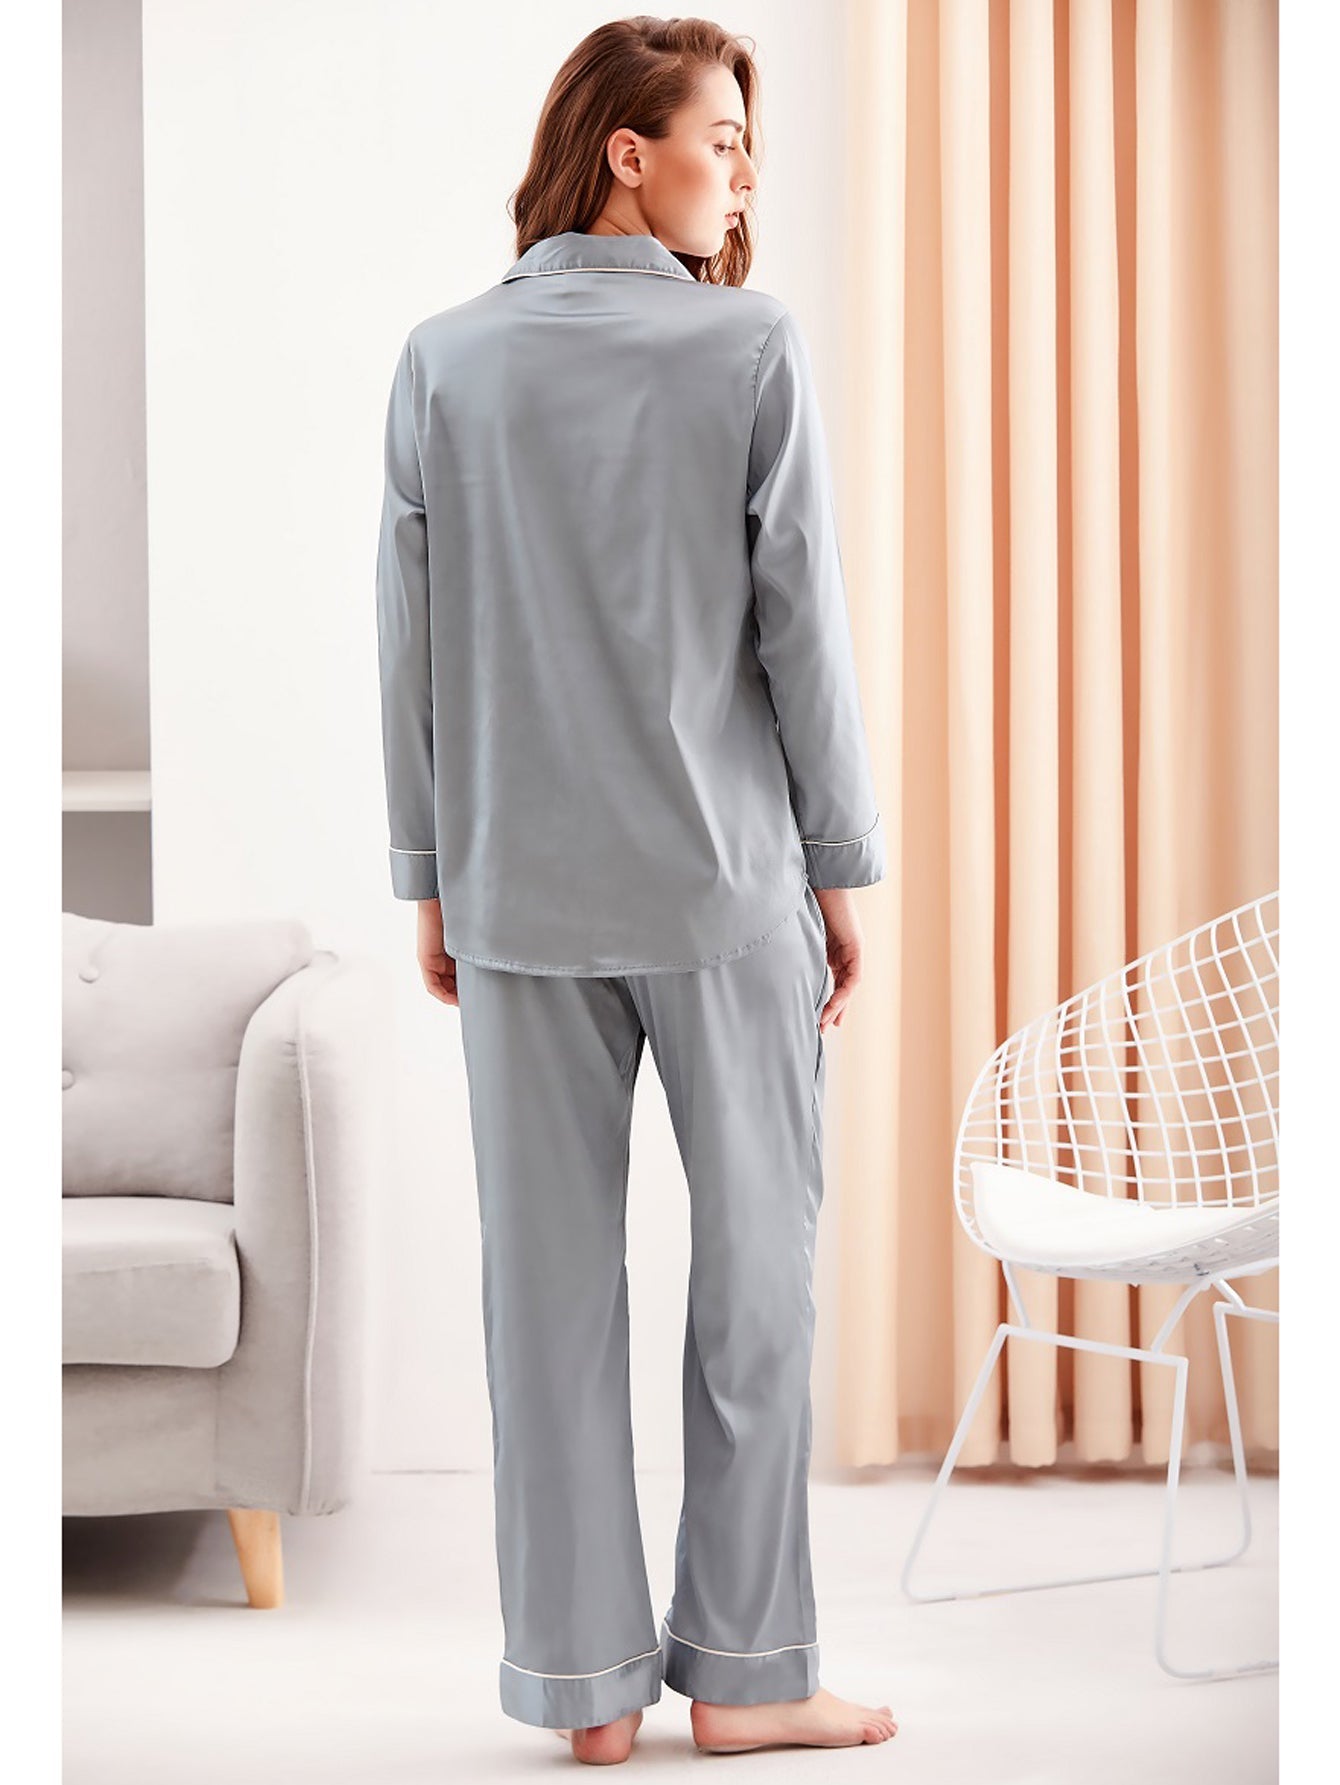 Women's casual long sleeved and long pant comfortable winter two-piece pajamas Sai Feel